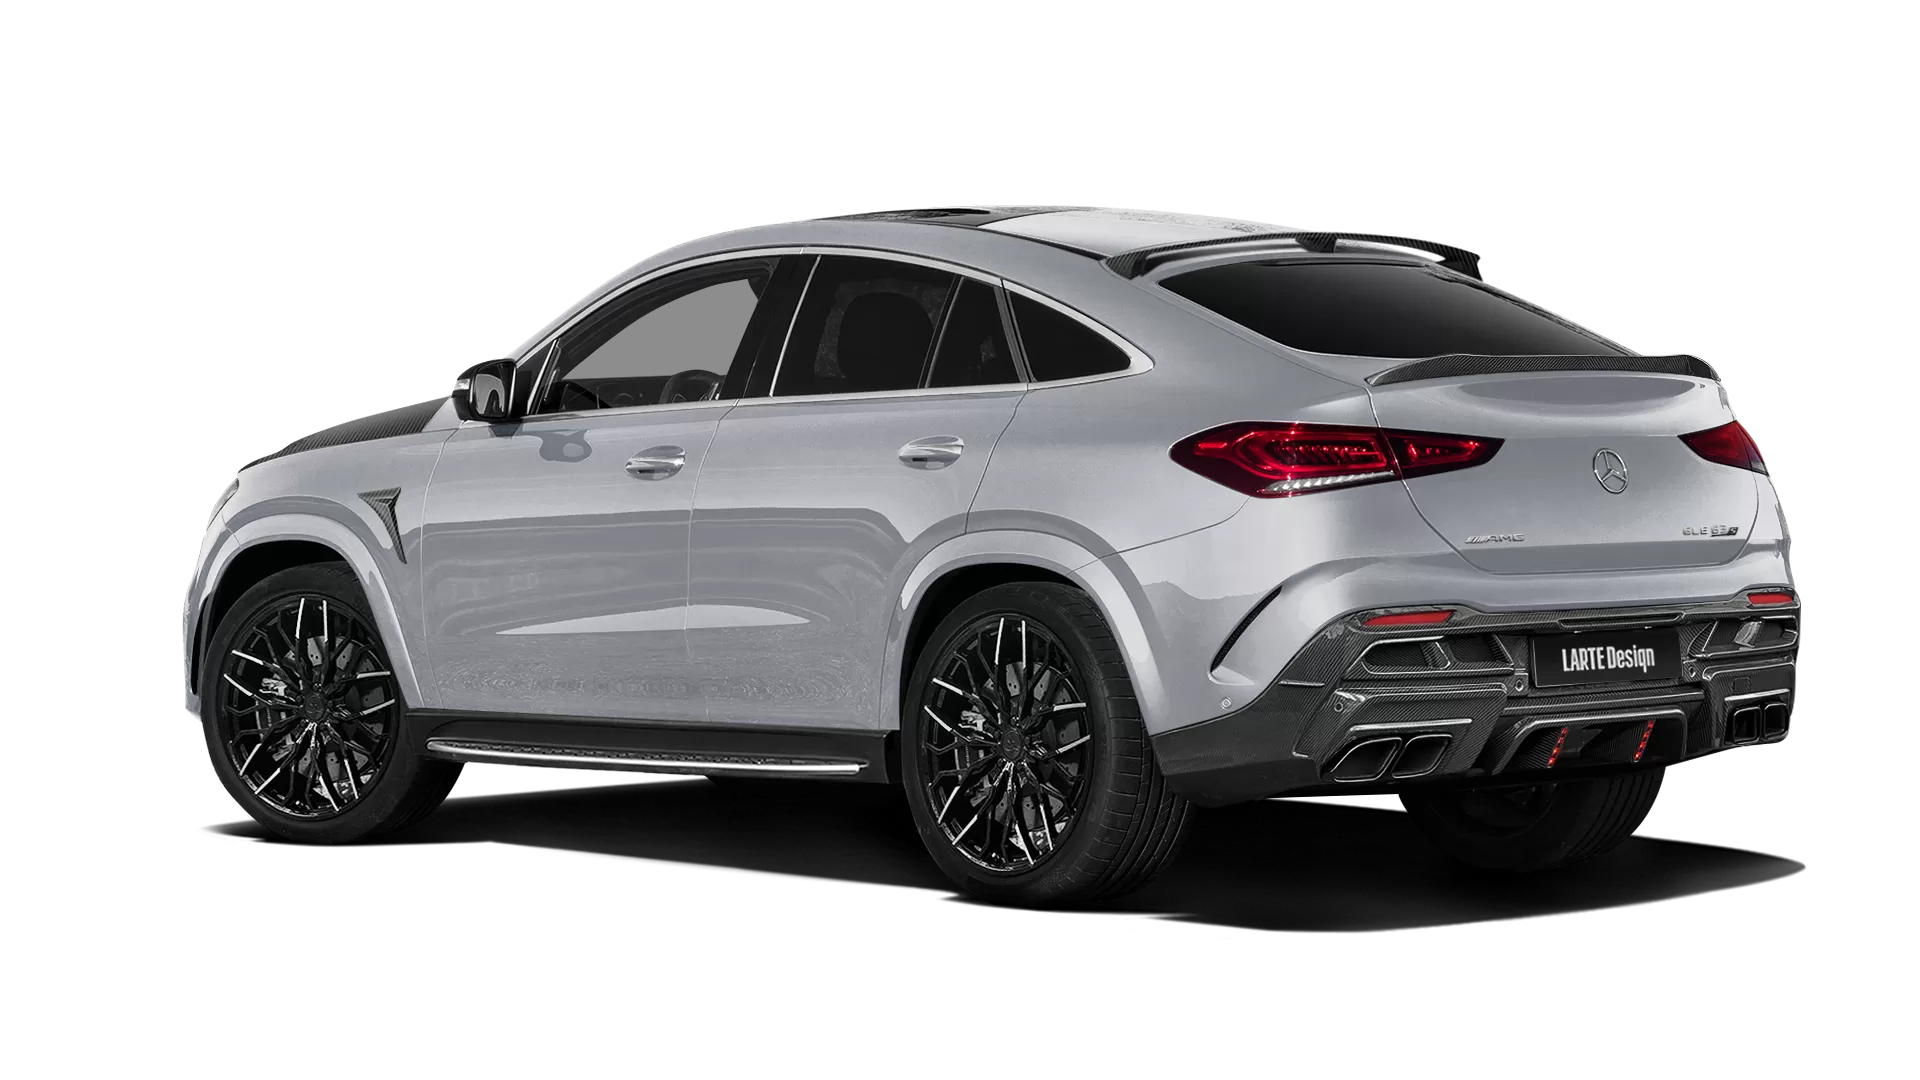 Mercedes GLE Coupe AMG 63 C167 with carbon body kit: back view shown in High Tech Silver